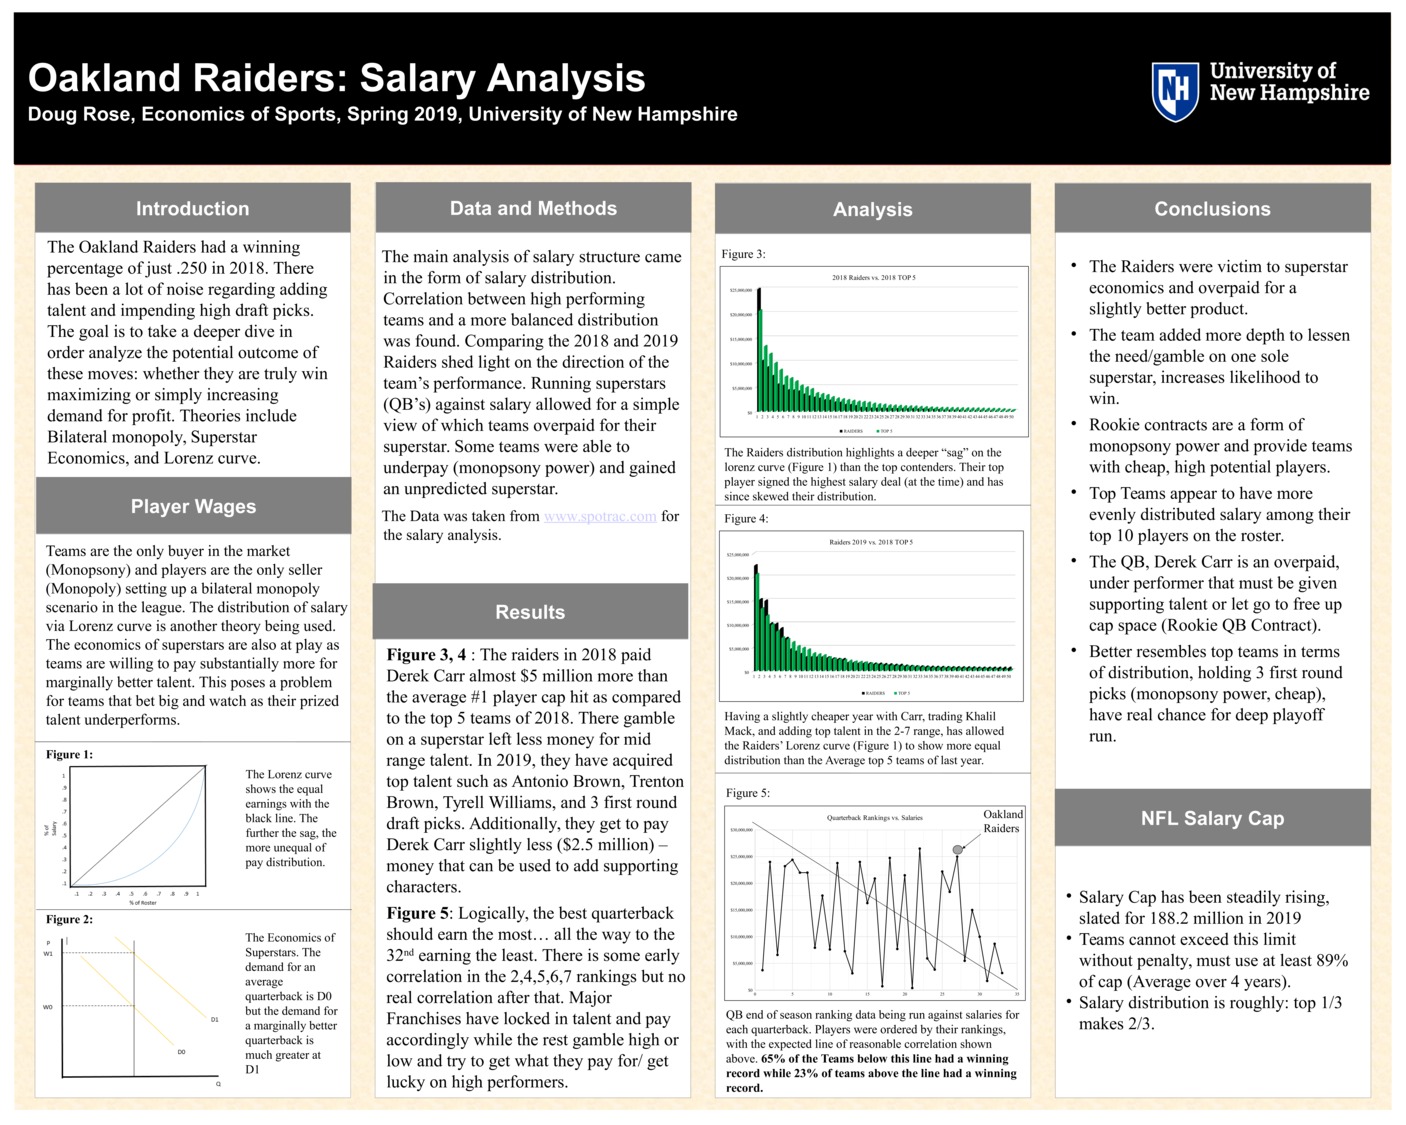 Oakland Raiders: Salary Analysis  by dr1039